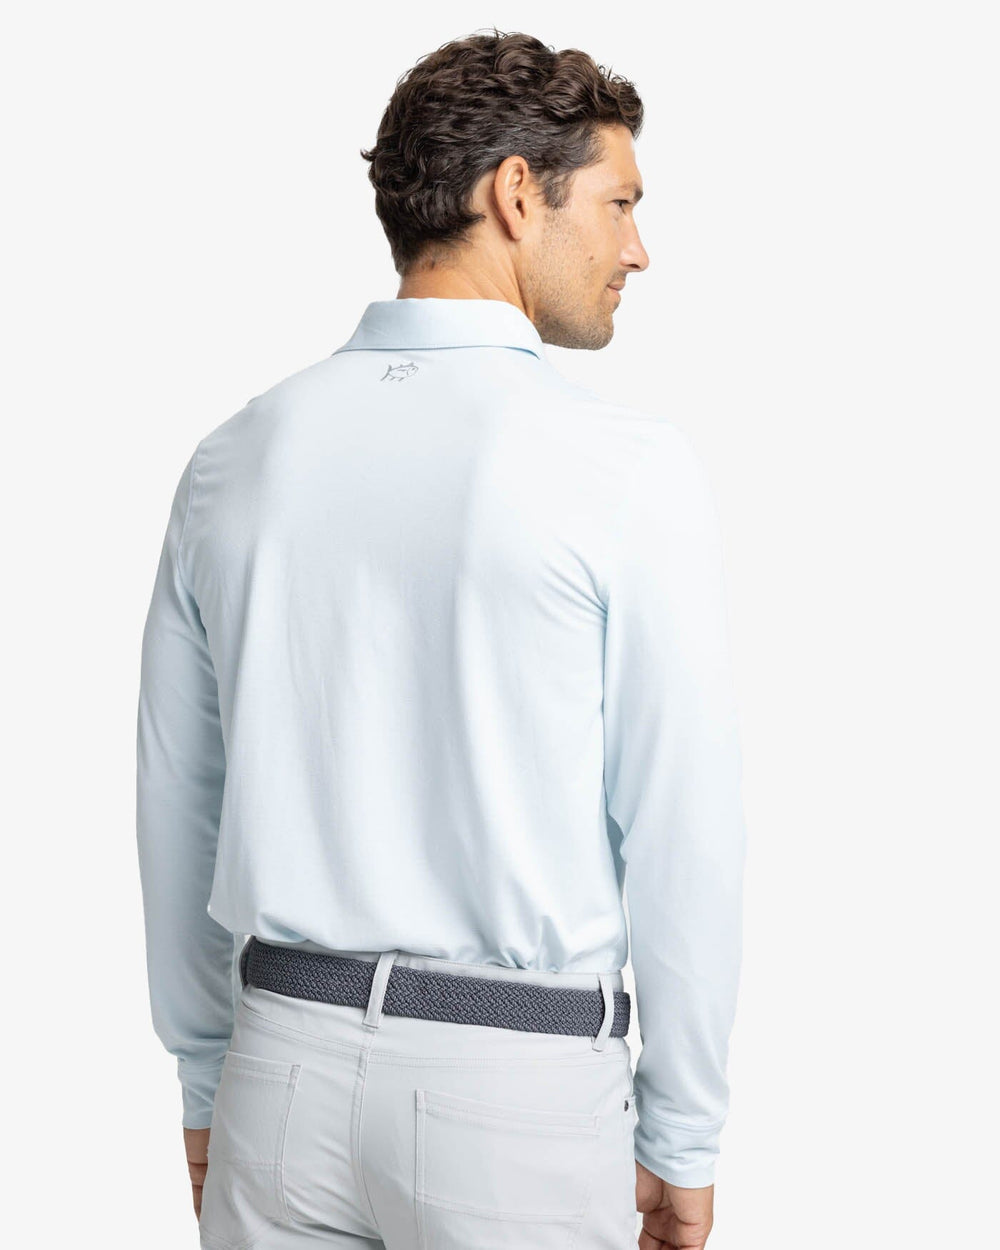 The back view of the Southern Tide Ryder Heather Ridgeway Stripe Long Sleeve Performance Polo by Southern Tide - Heather Cloud White